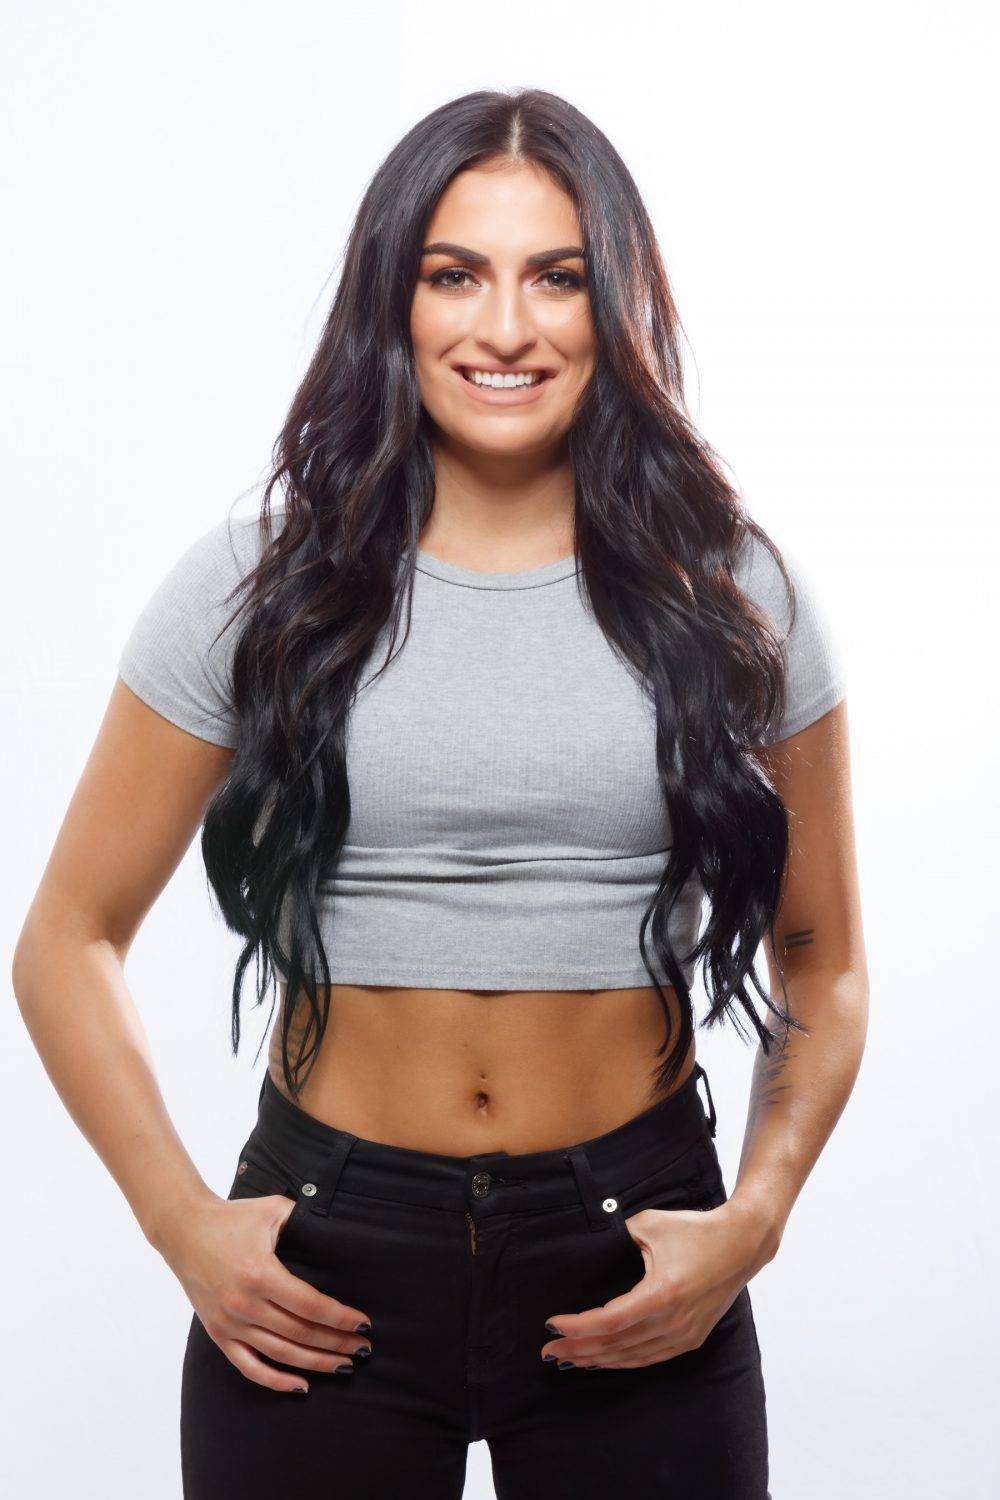 Sonya Deville Tight Top And Jeans Scrolller